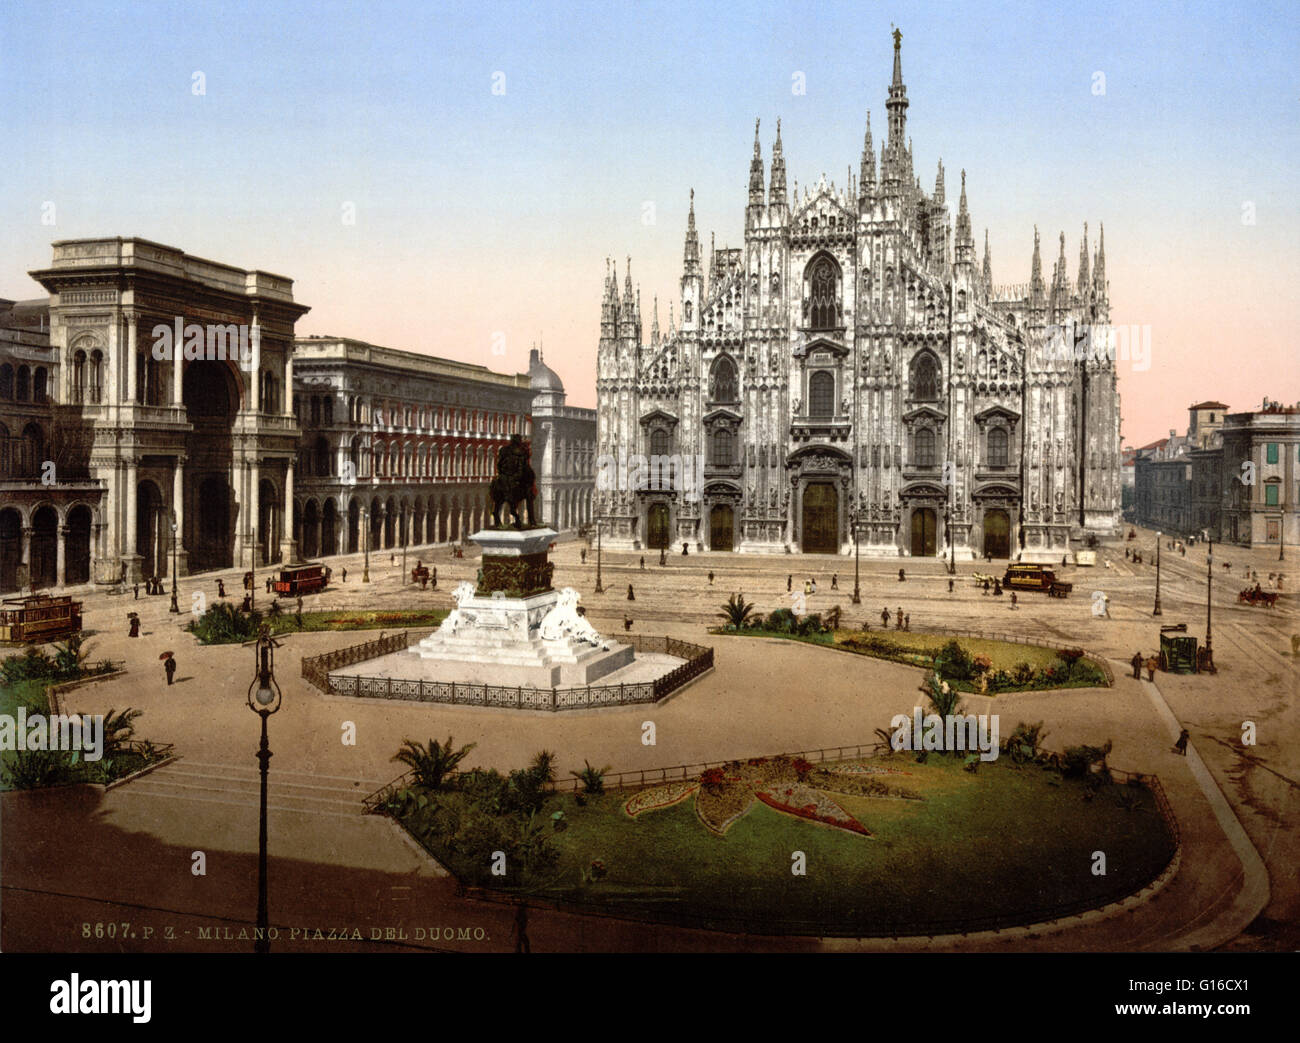 Piazza del Duomo (Cathedral Square) is the main piazza (city square) of Milan, Italy. It is named after, and dominated by, the Milan Cathedral (the Duomo). The piazza marks the center of the city, both in a geographic sense and because of its importance f Stock Photo